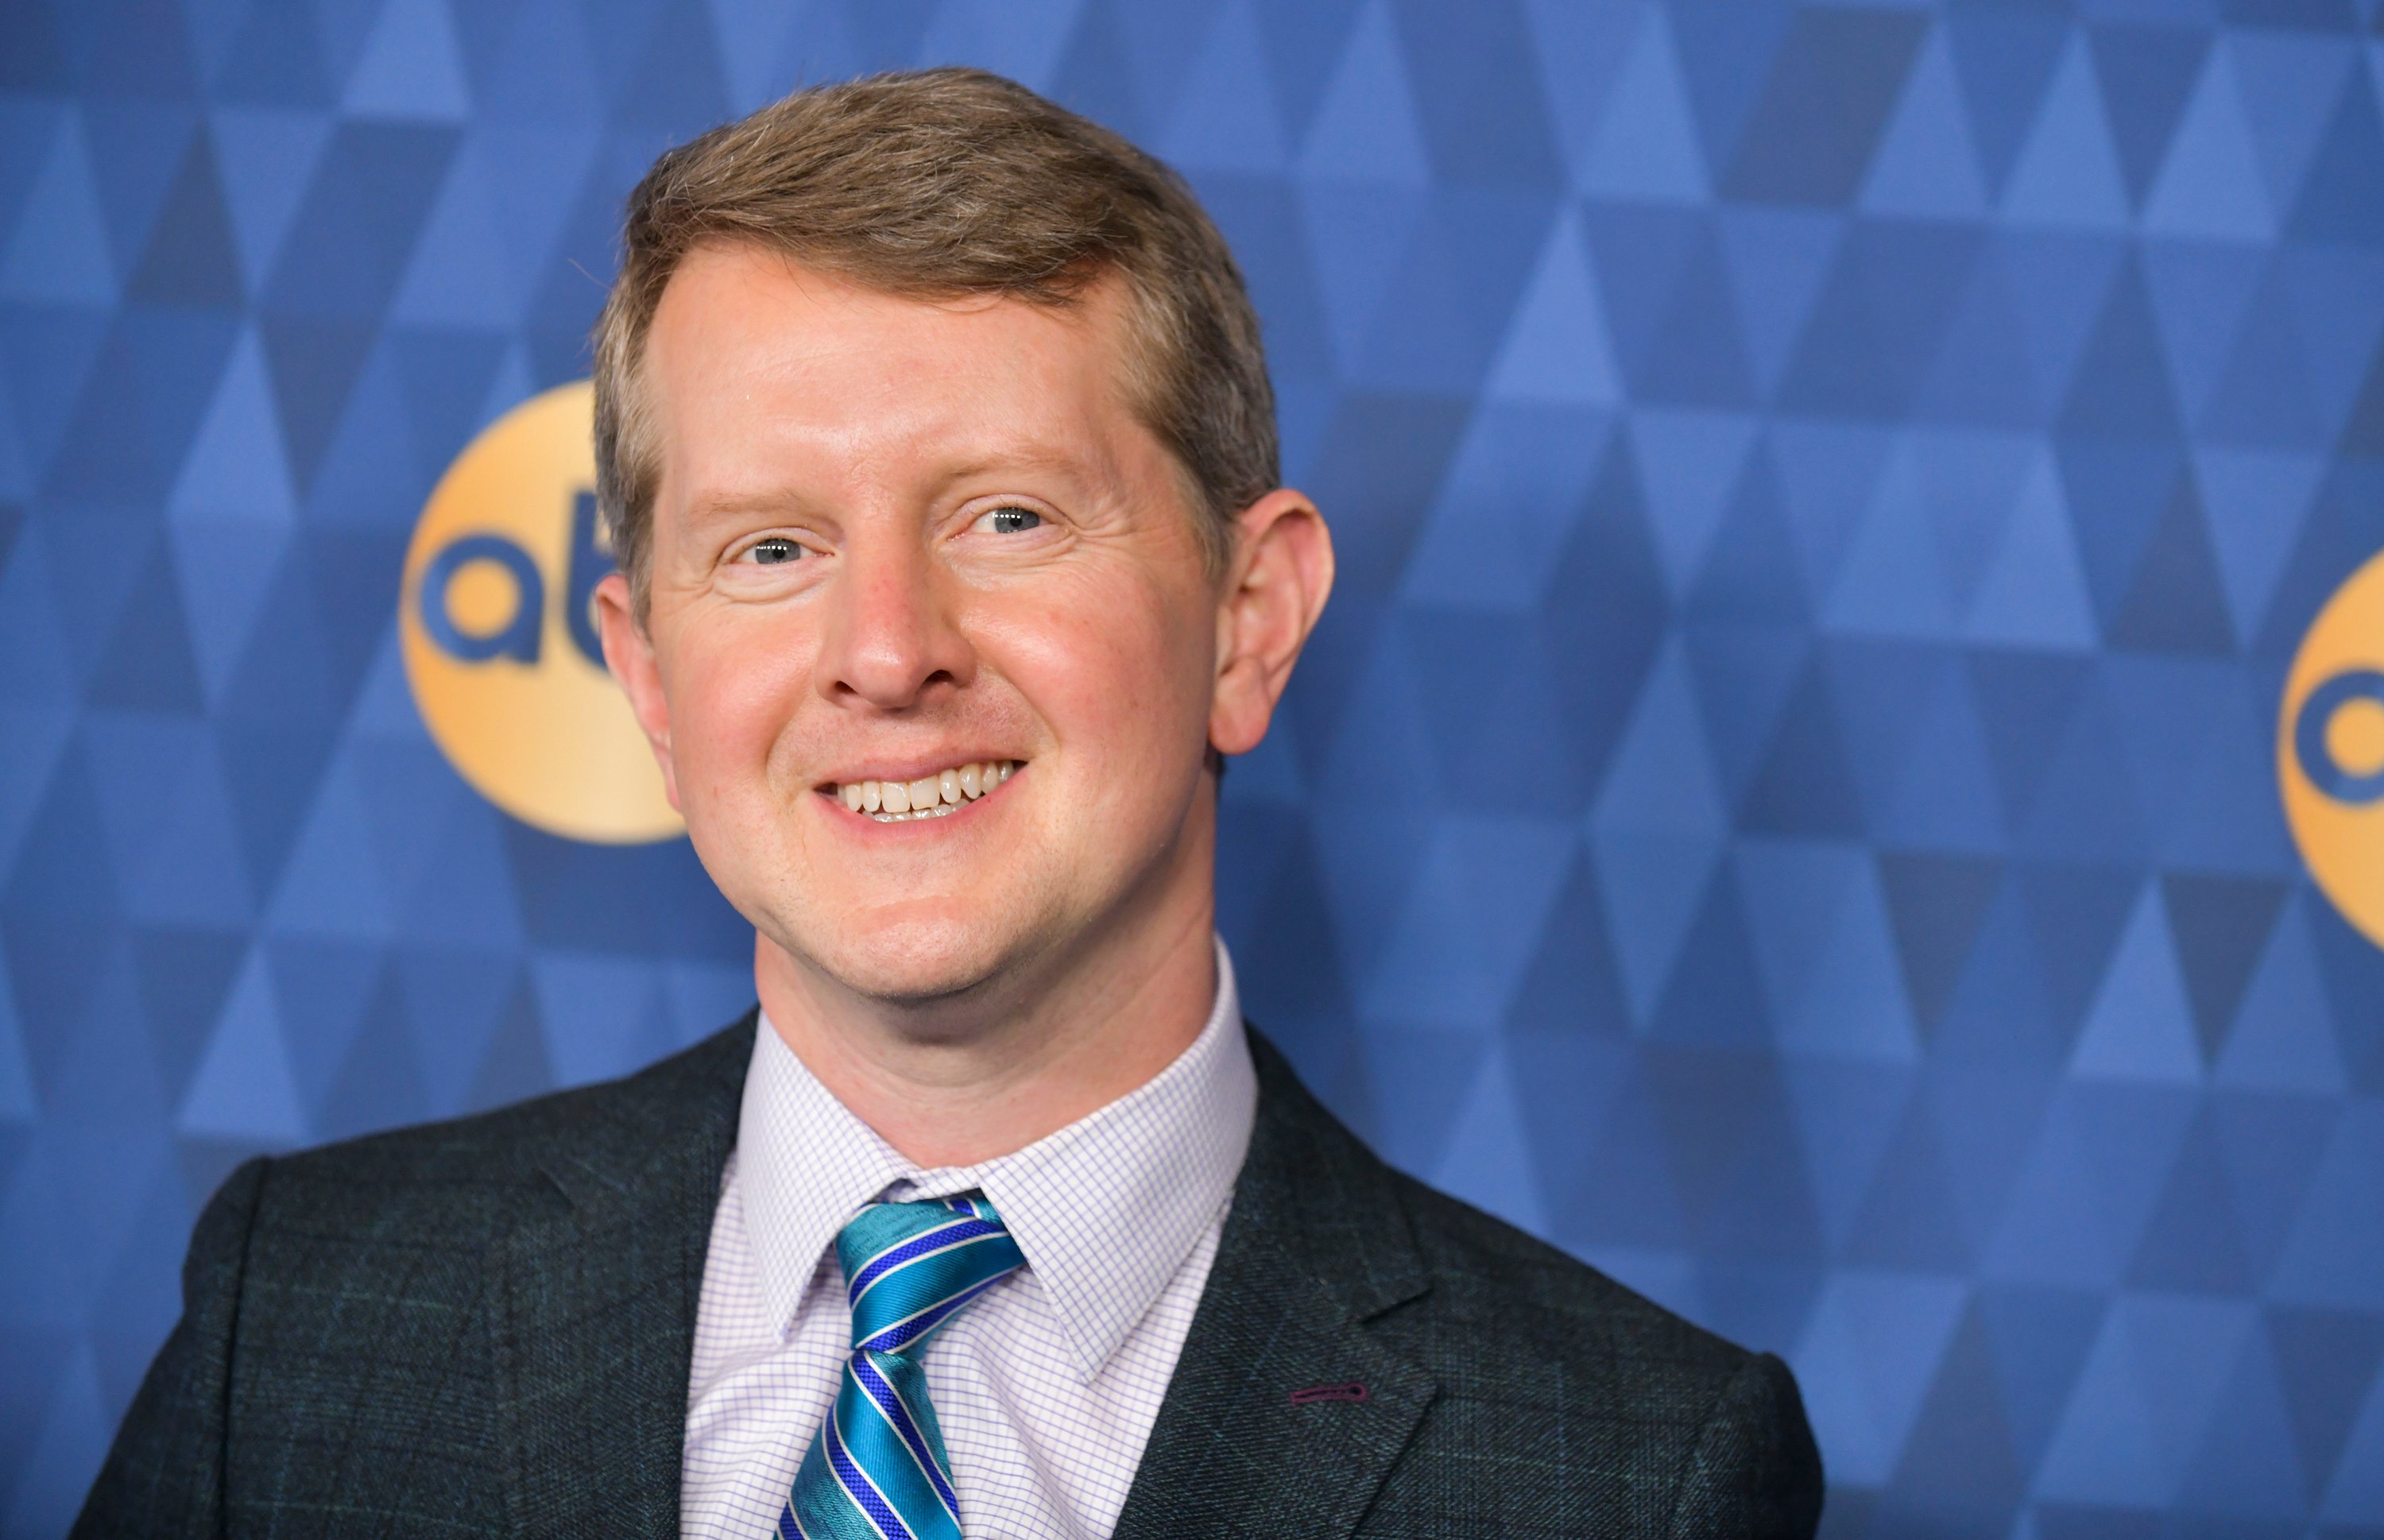 'Jeopardy!' GOAT Ken Jennings attends the ABC Television's Winter Press Tour 2020